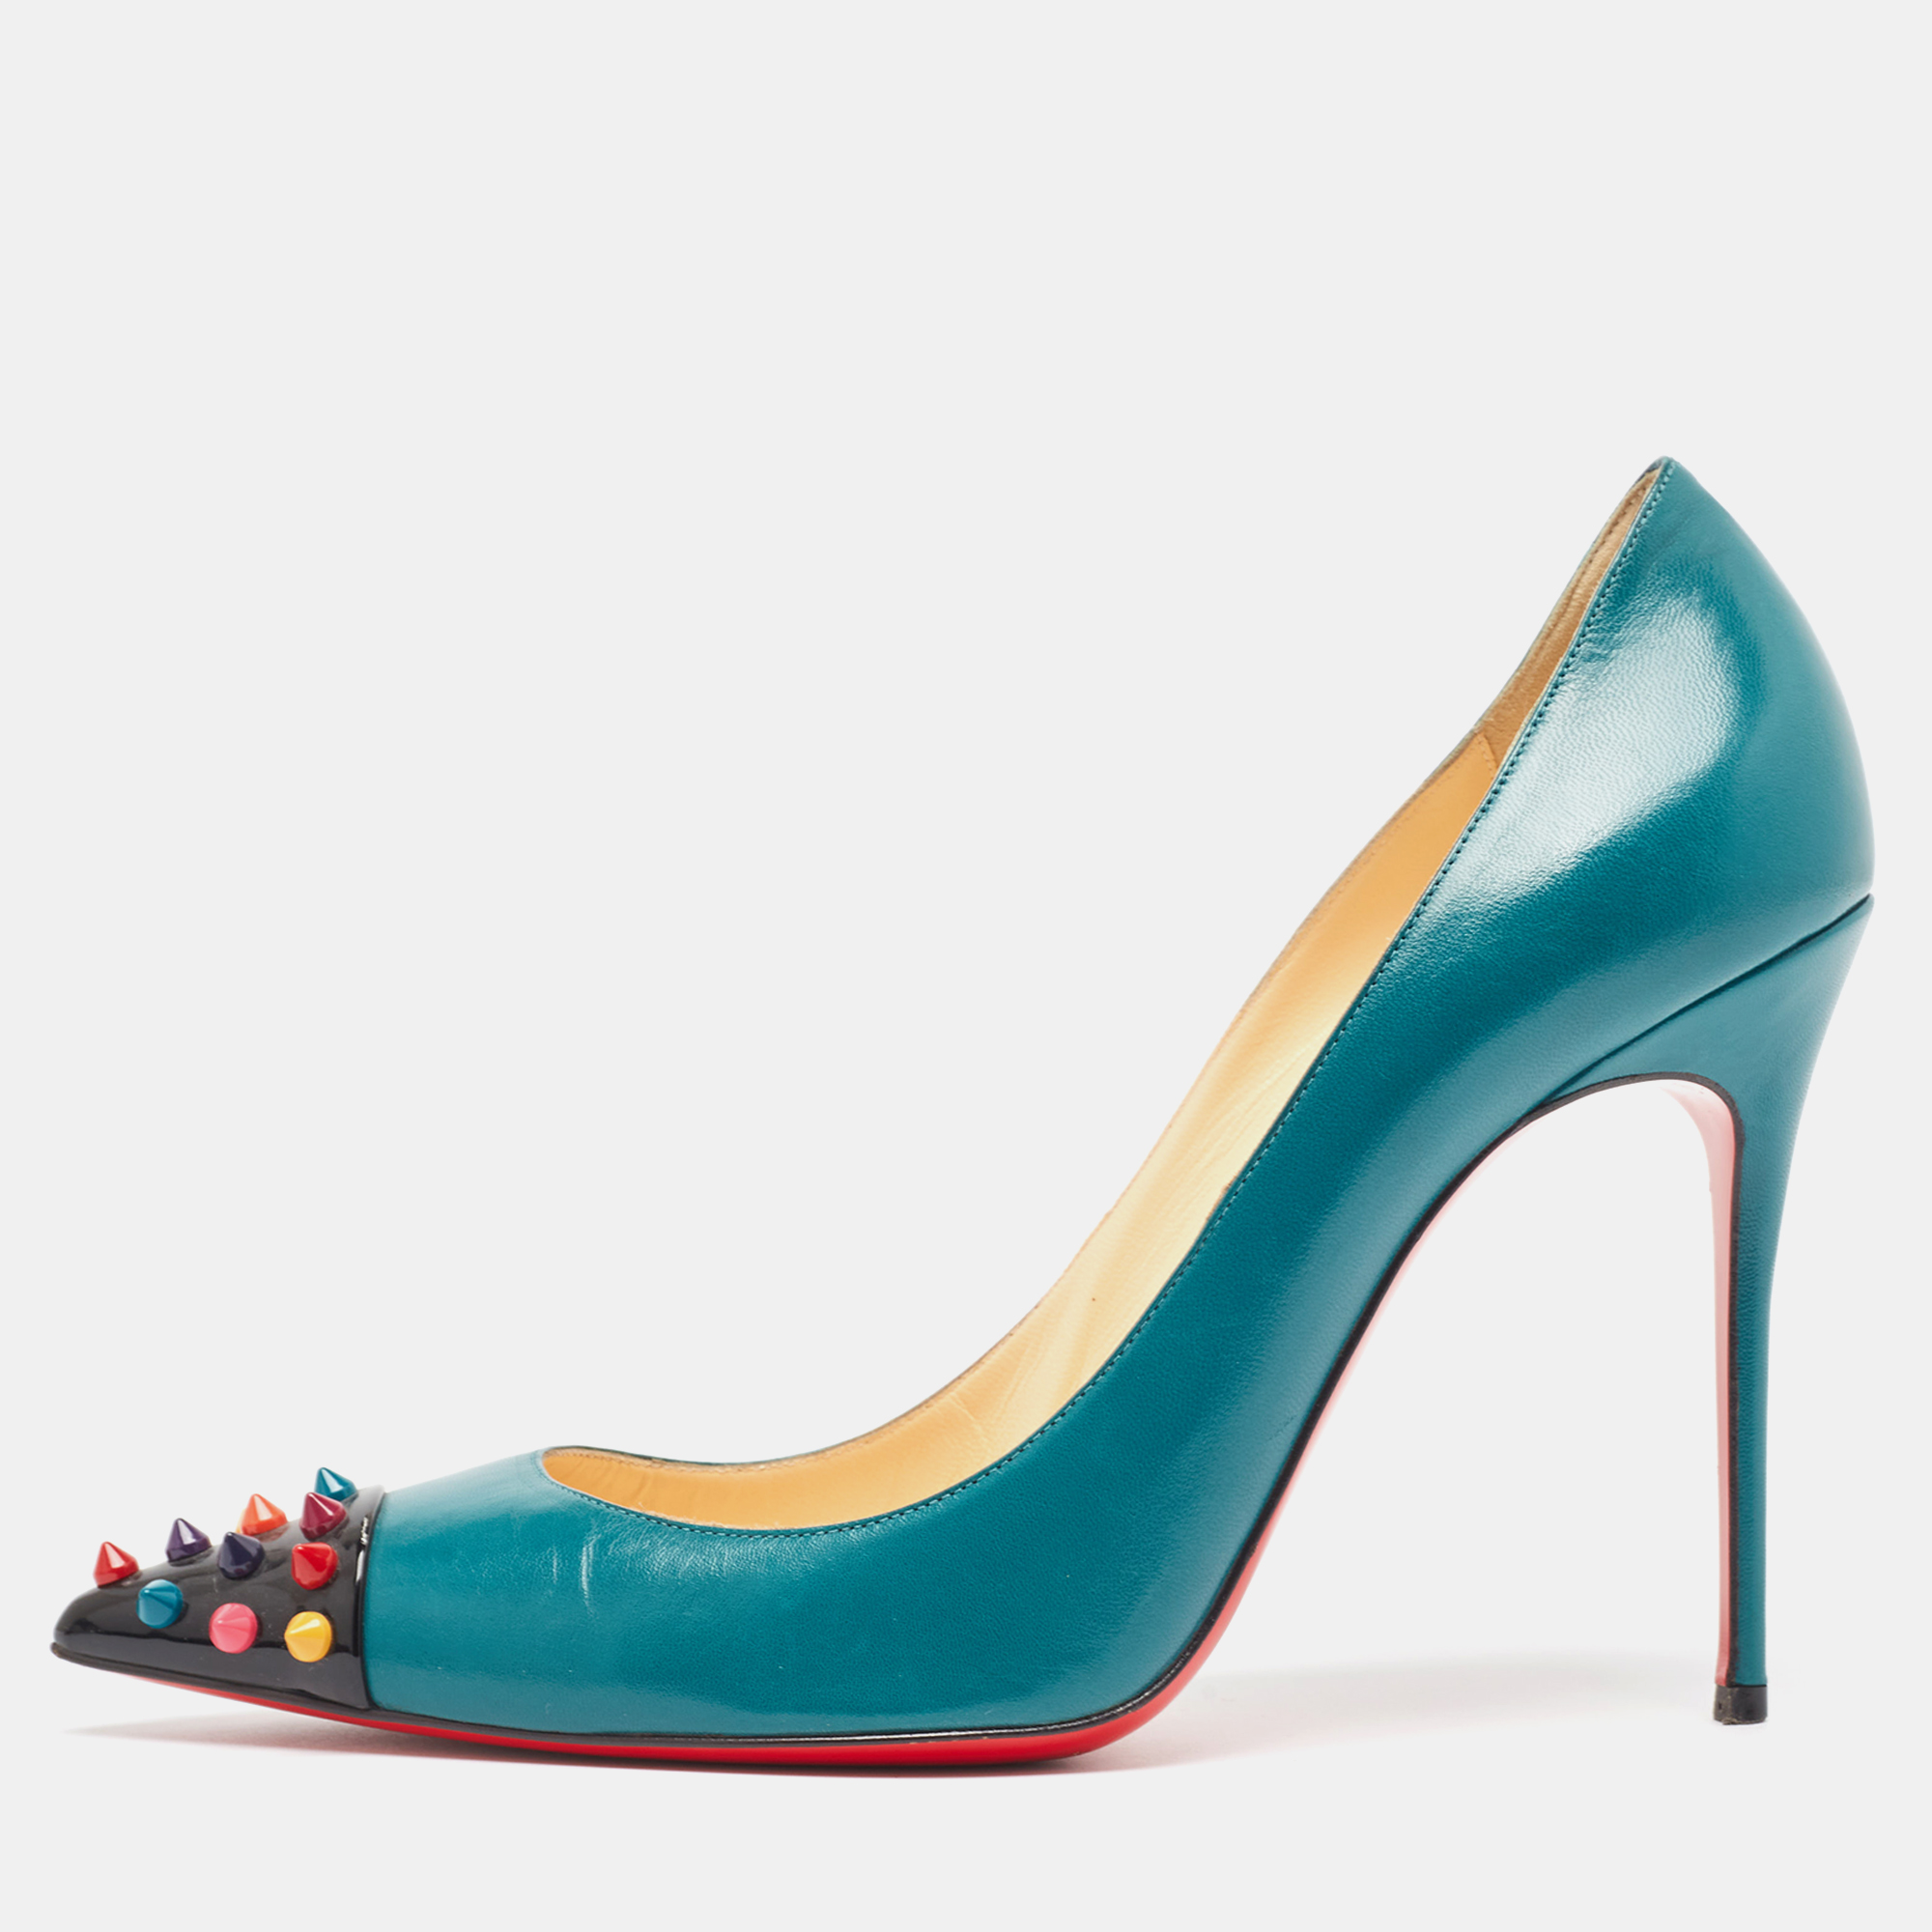 Be ready for praises and admirable gasps from your audience when you walk in these pumps from Christian Louboutin. Crafted from green leather they carry pointed toes and spikes decorated on the cap toes. The pair is complete with 12cm heels and the iconic red soles.